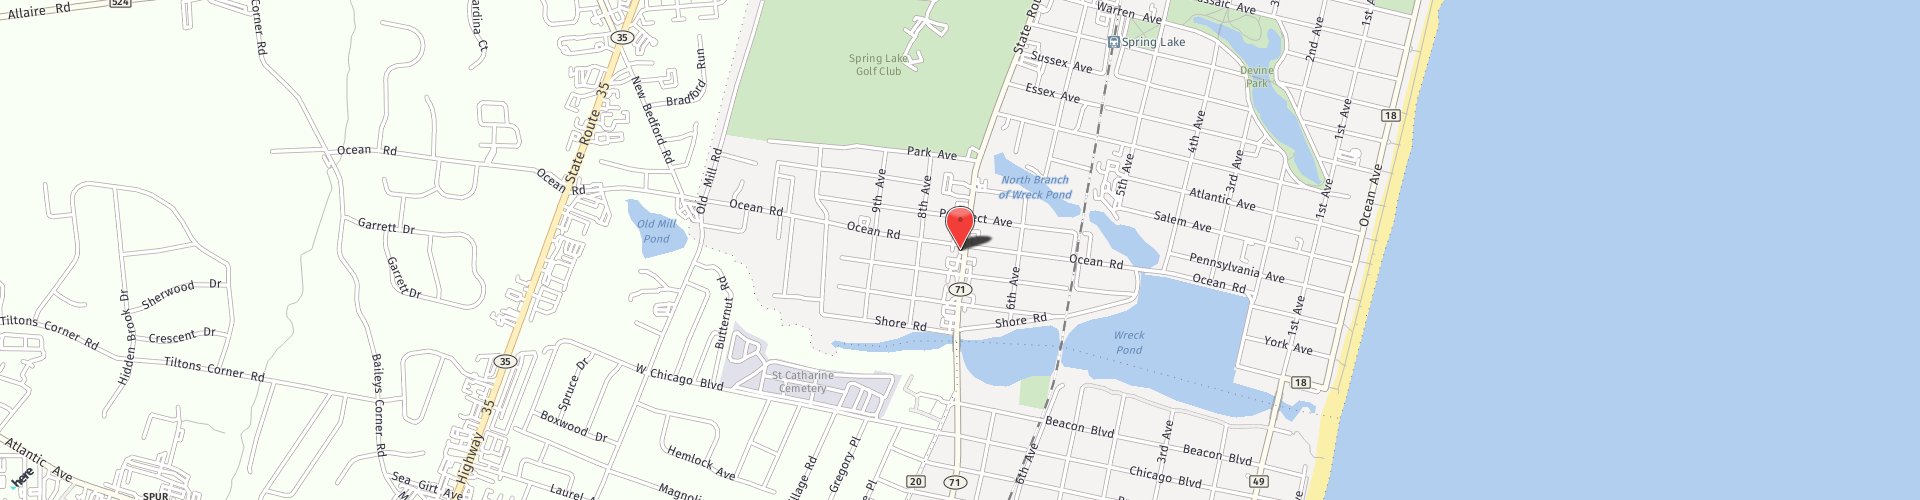 Location Map: 211 Highway 71 Spring Lake Heights, NJ 07762